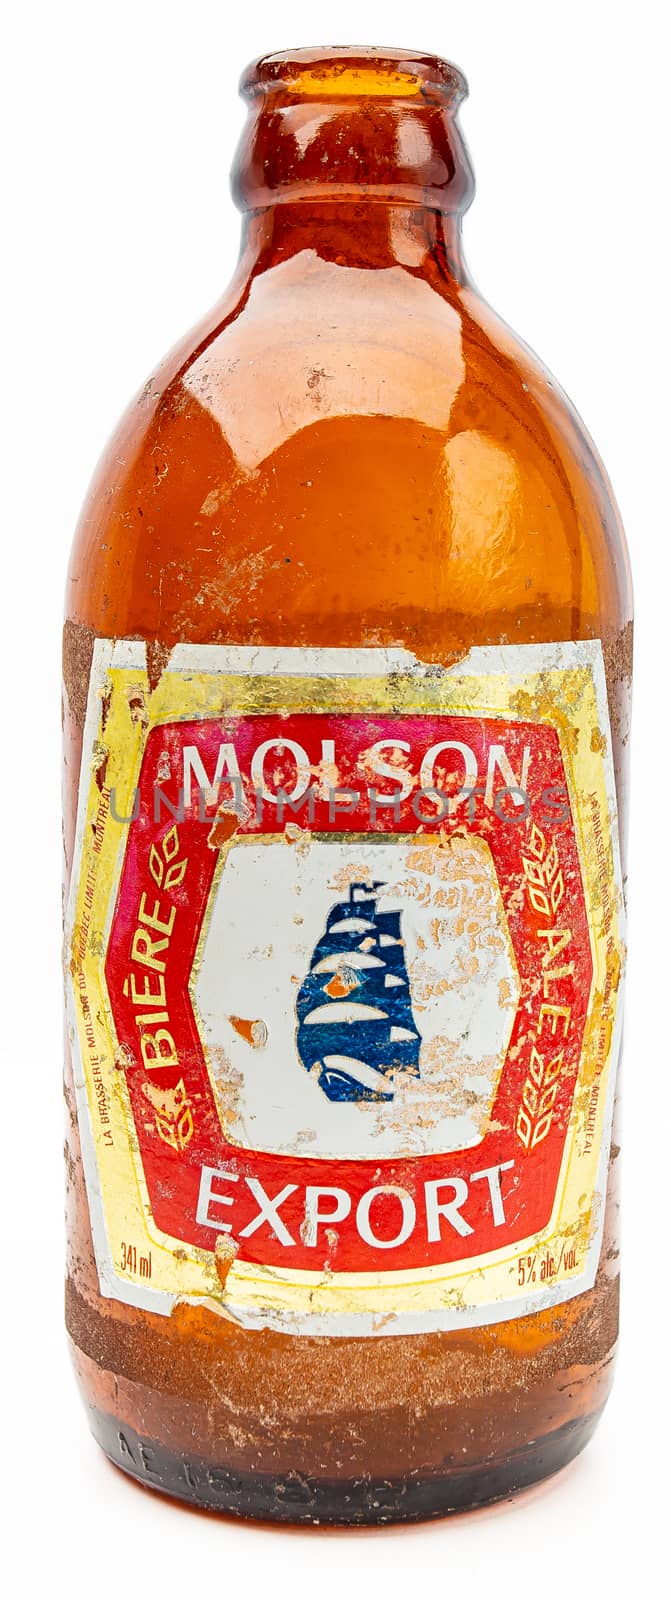 Old Molson Export beer bottle isolated against white background